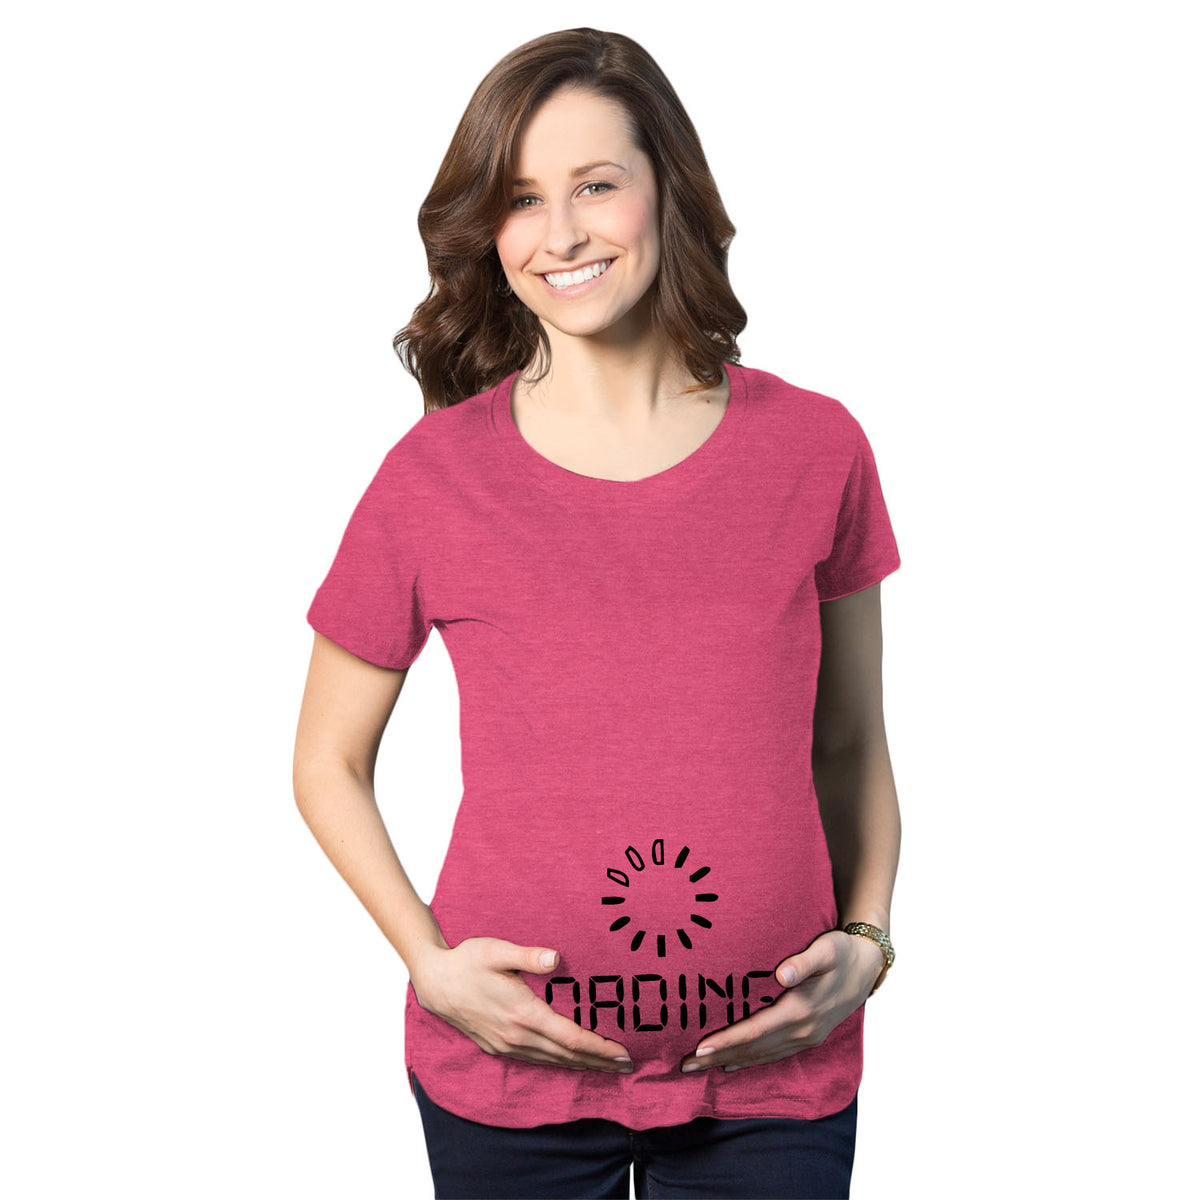 Funny Pink Baby Loading Maternity T Shirt Nerdy internet Tee